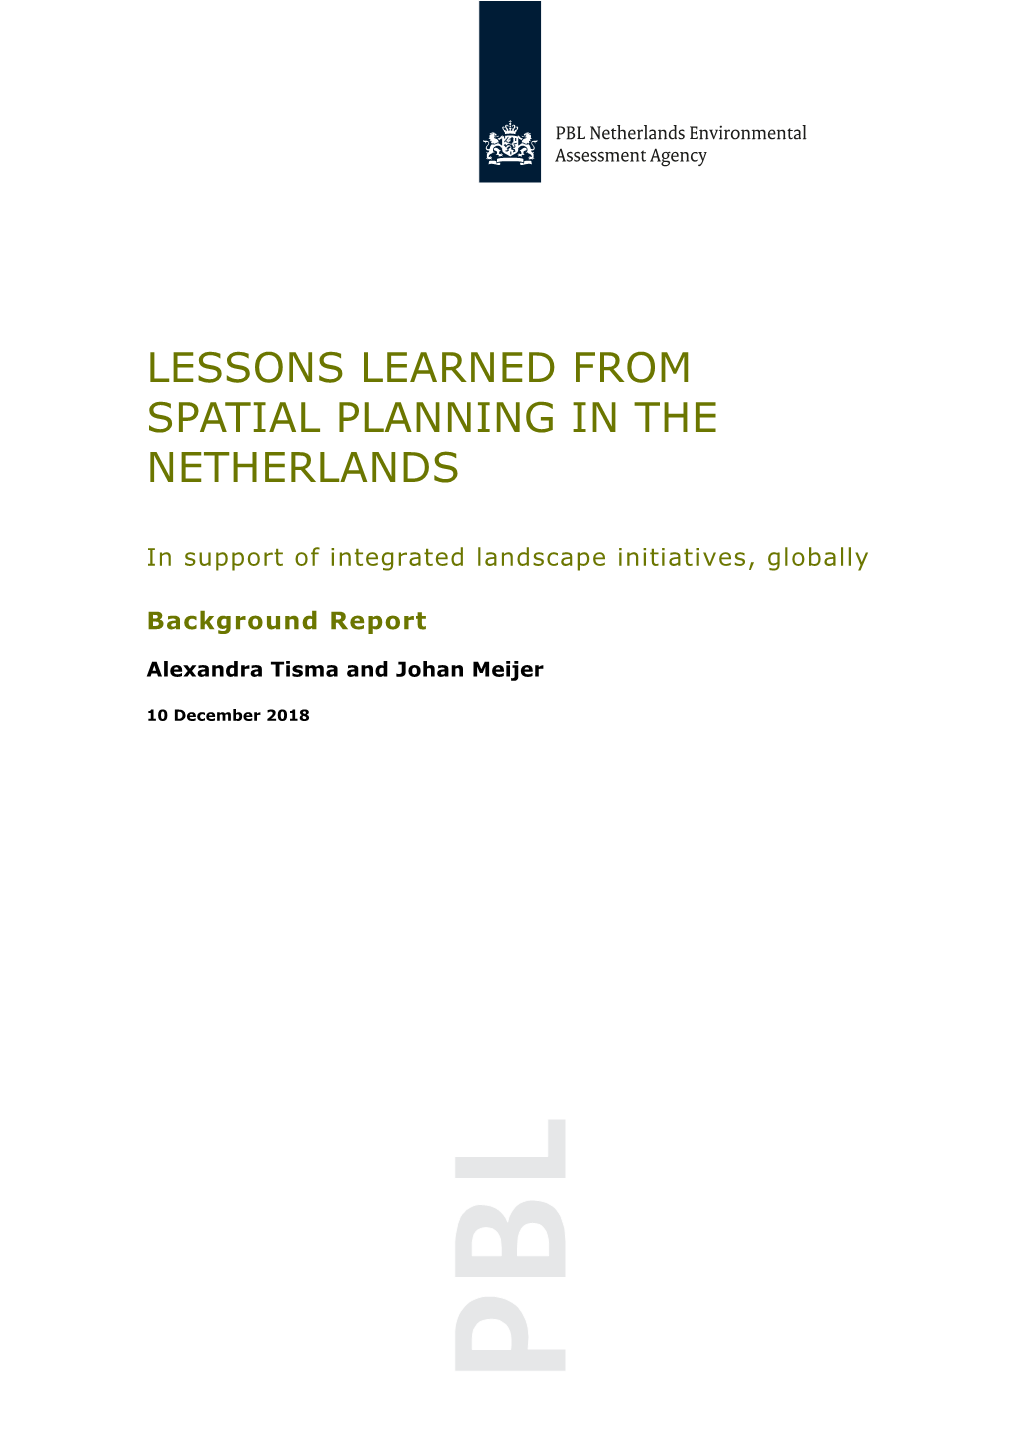 Lessons Learned from Spatial Planning in the Netherlands